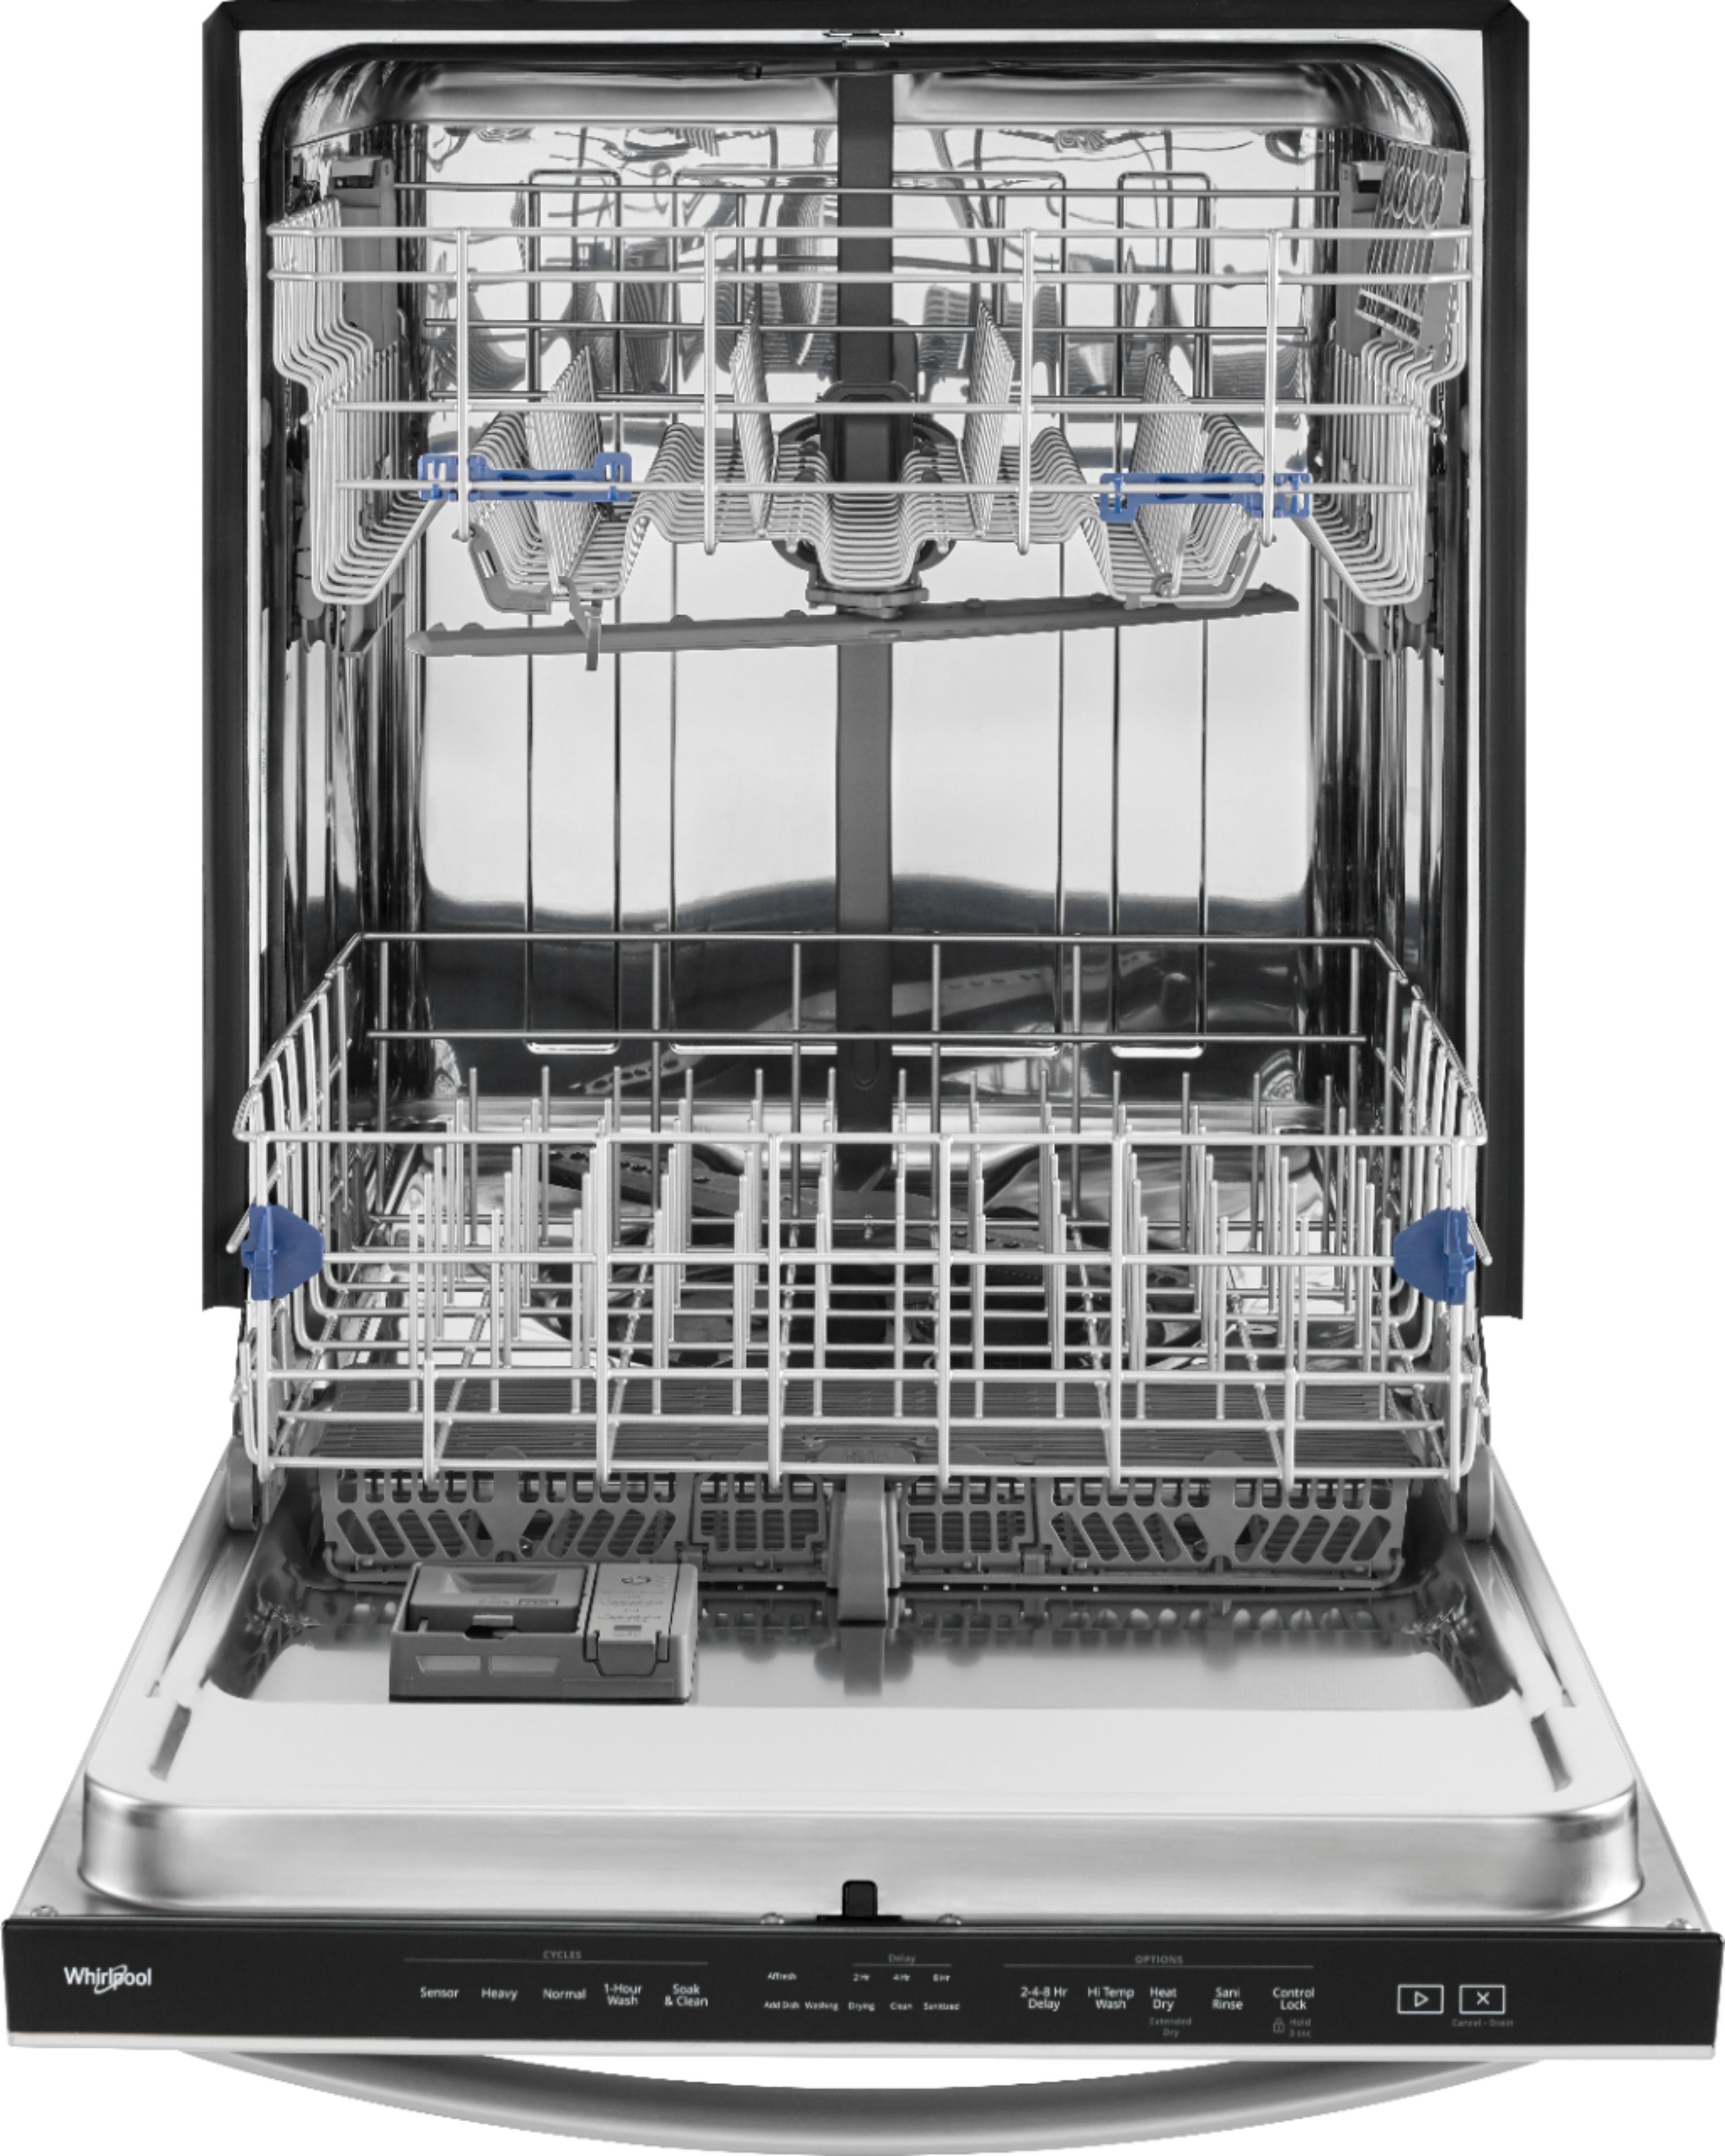 whirlpool dishwasher 18 inch stainless